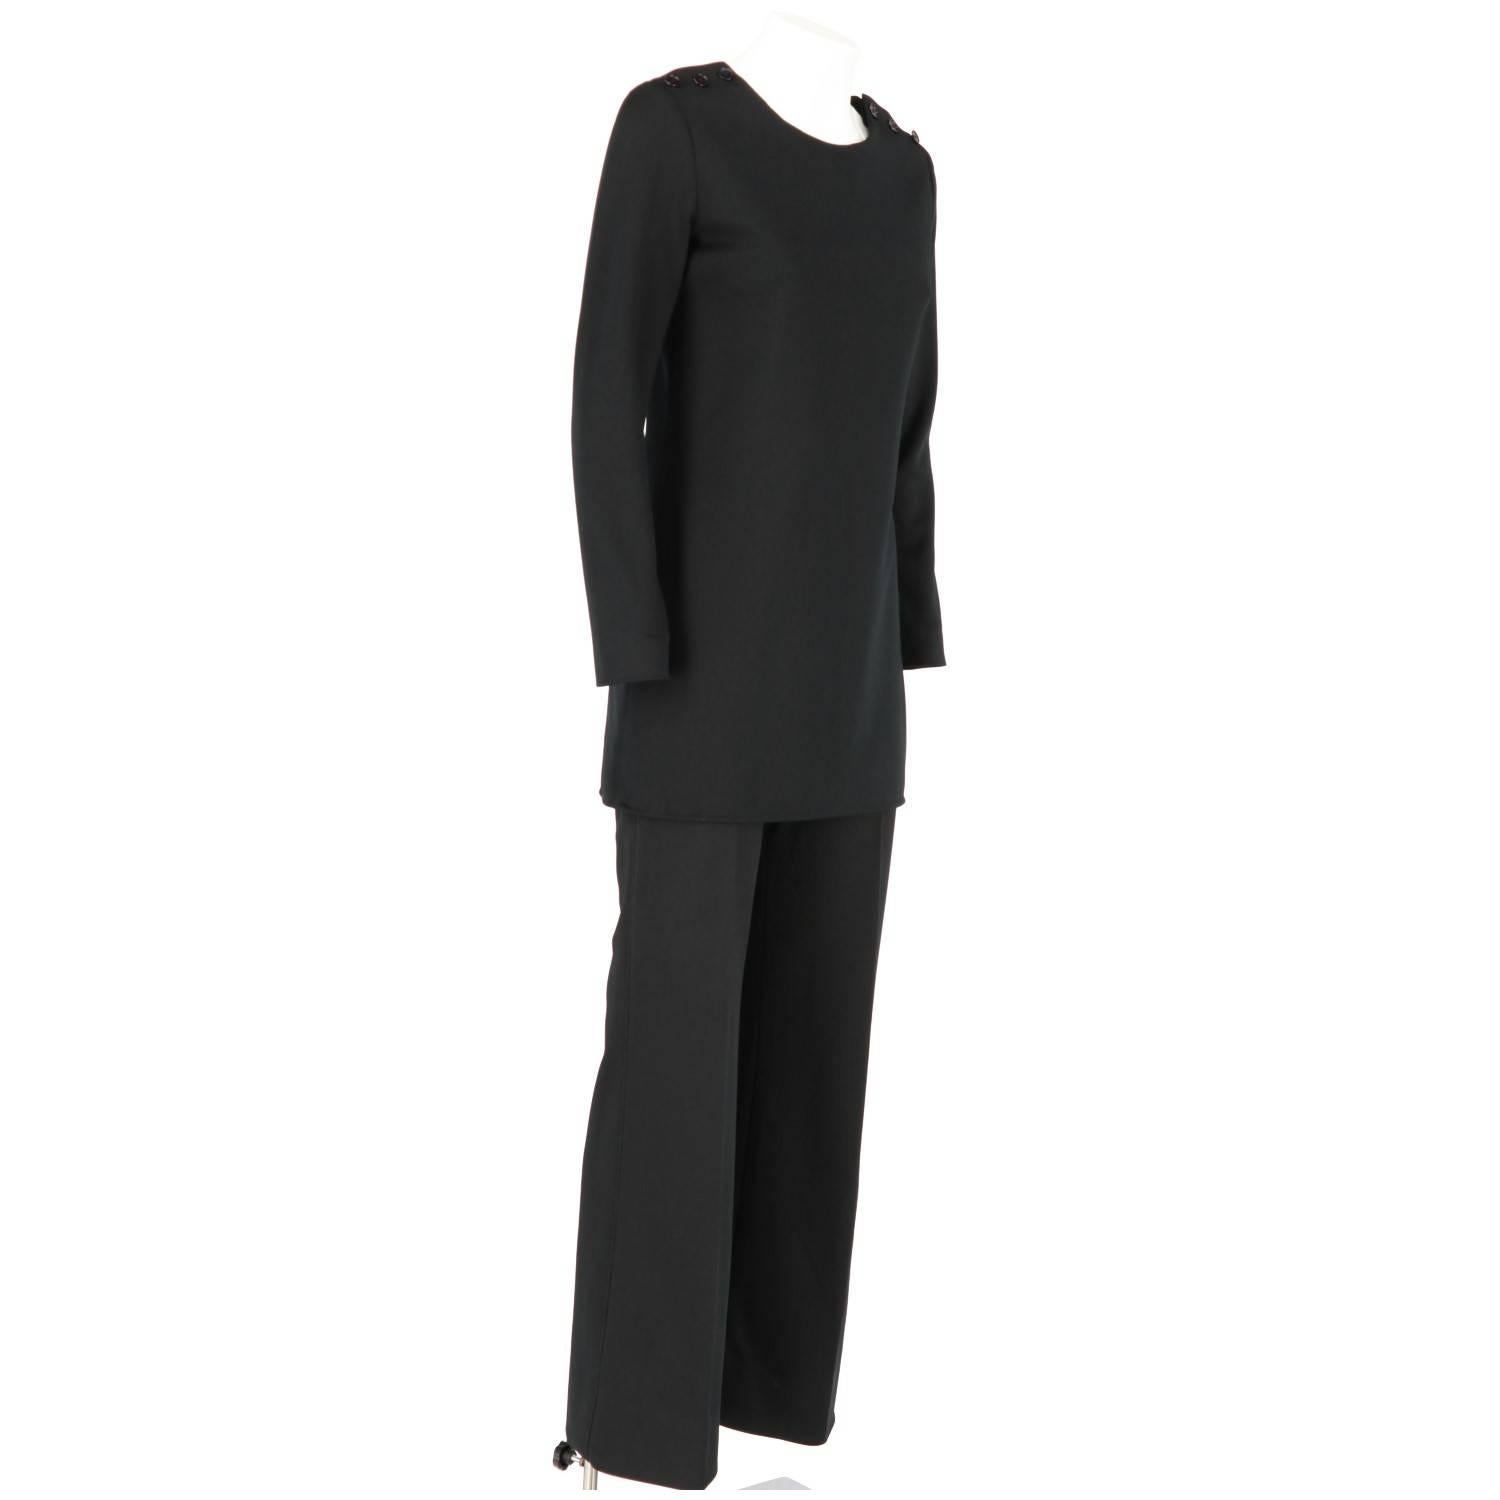 Elegant Yves Saint Laurent black design suit with buttoned blouse and trousers.

Top
Height: 76 cm
Shoulders: 35 cm
Bust: 42 cm
Sleeves: 57 cm

Trousers
Height: 102 cm
Waist: 29 cm
